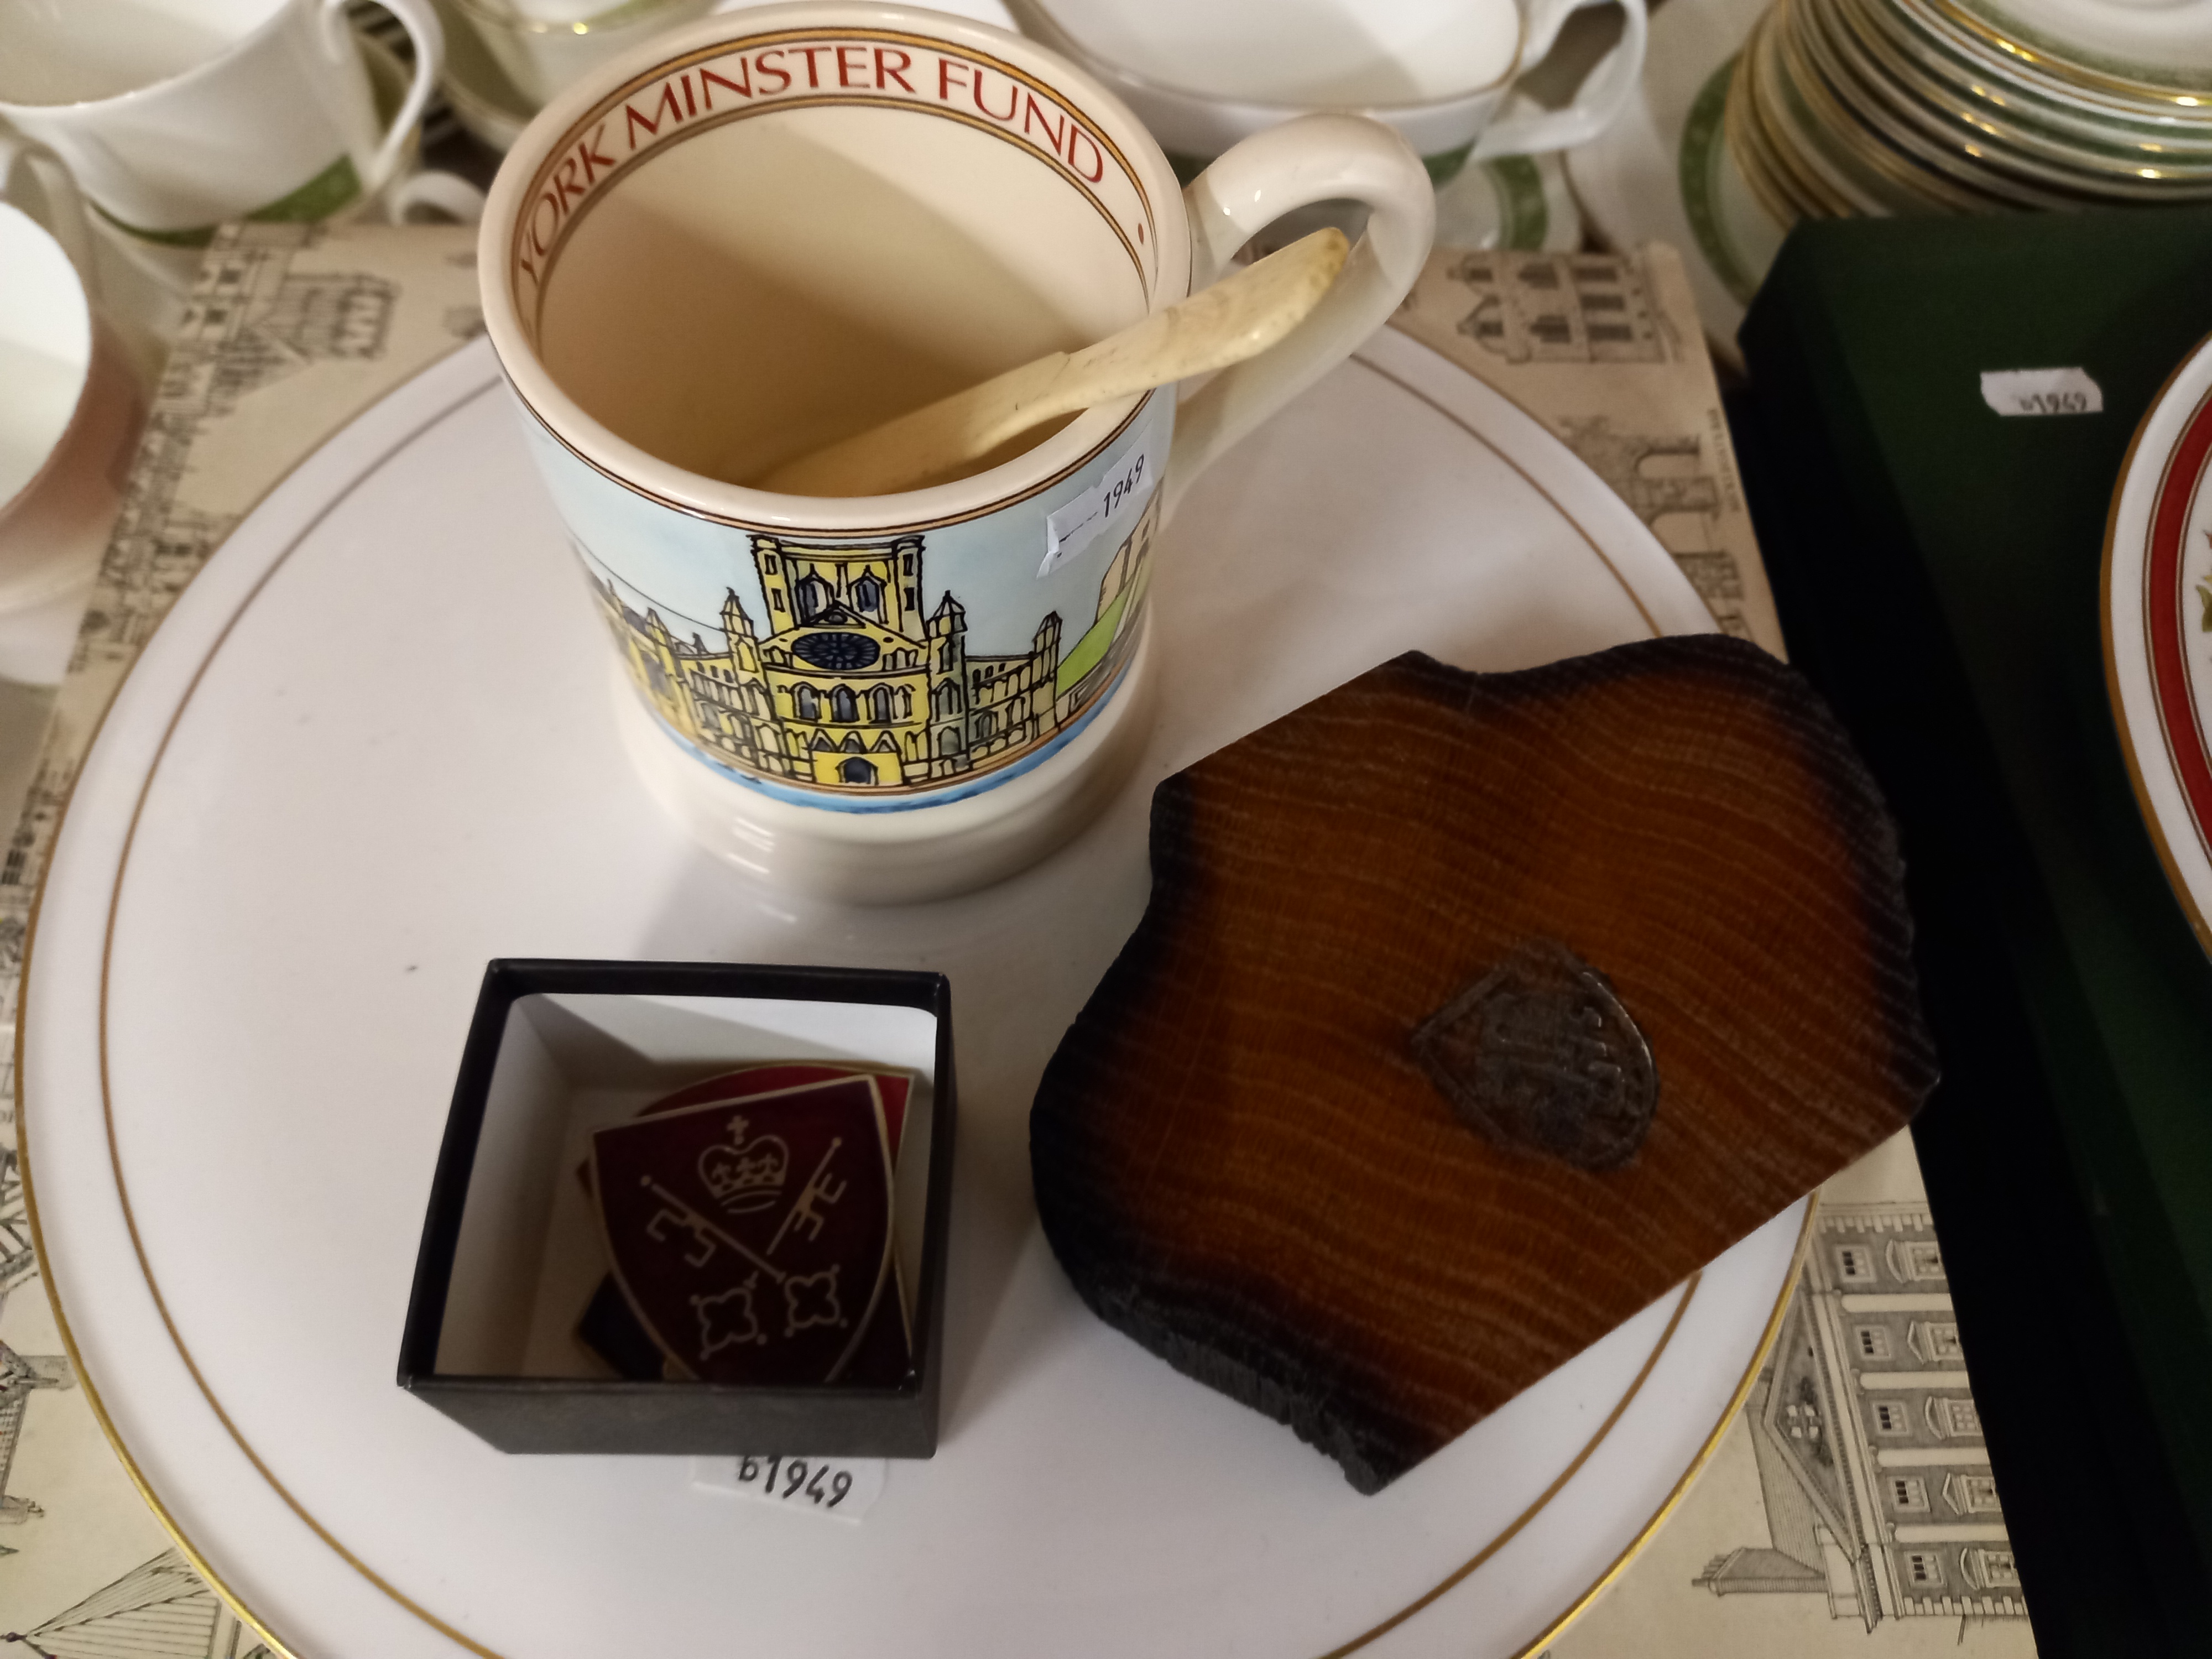 ROYAL DOULTON ' RONDELAY' DINNER SERVICE, YORK MINSTER ITEMS & LIMITED EDITION PLATES" - Image 5 of 11